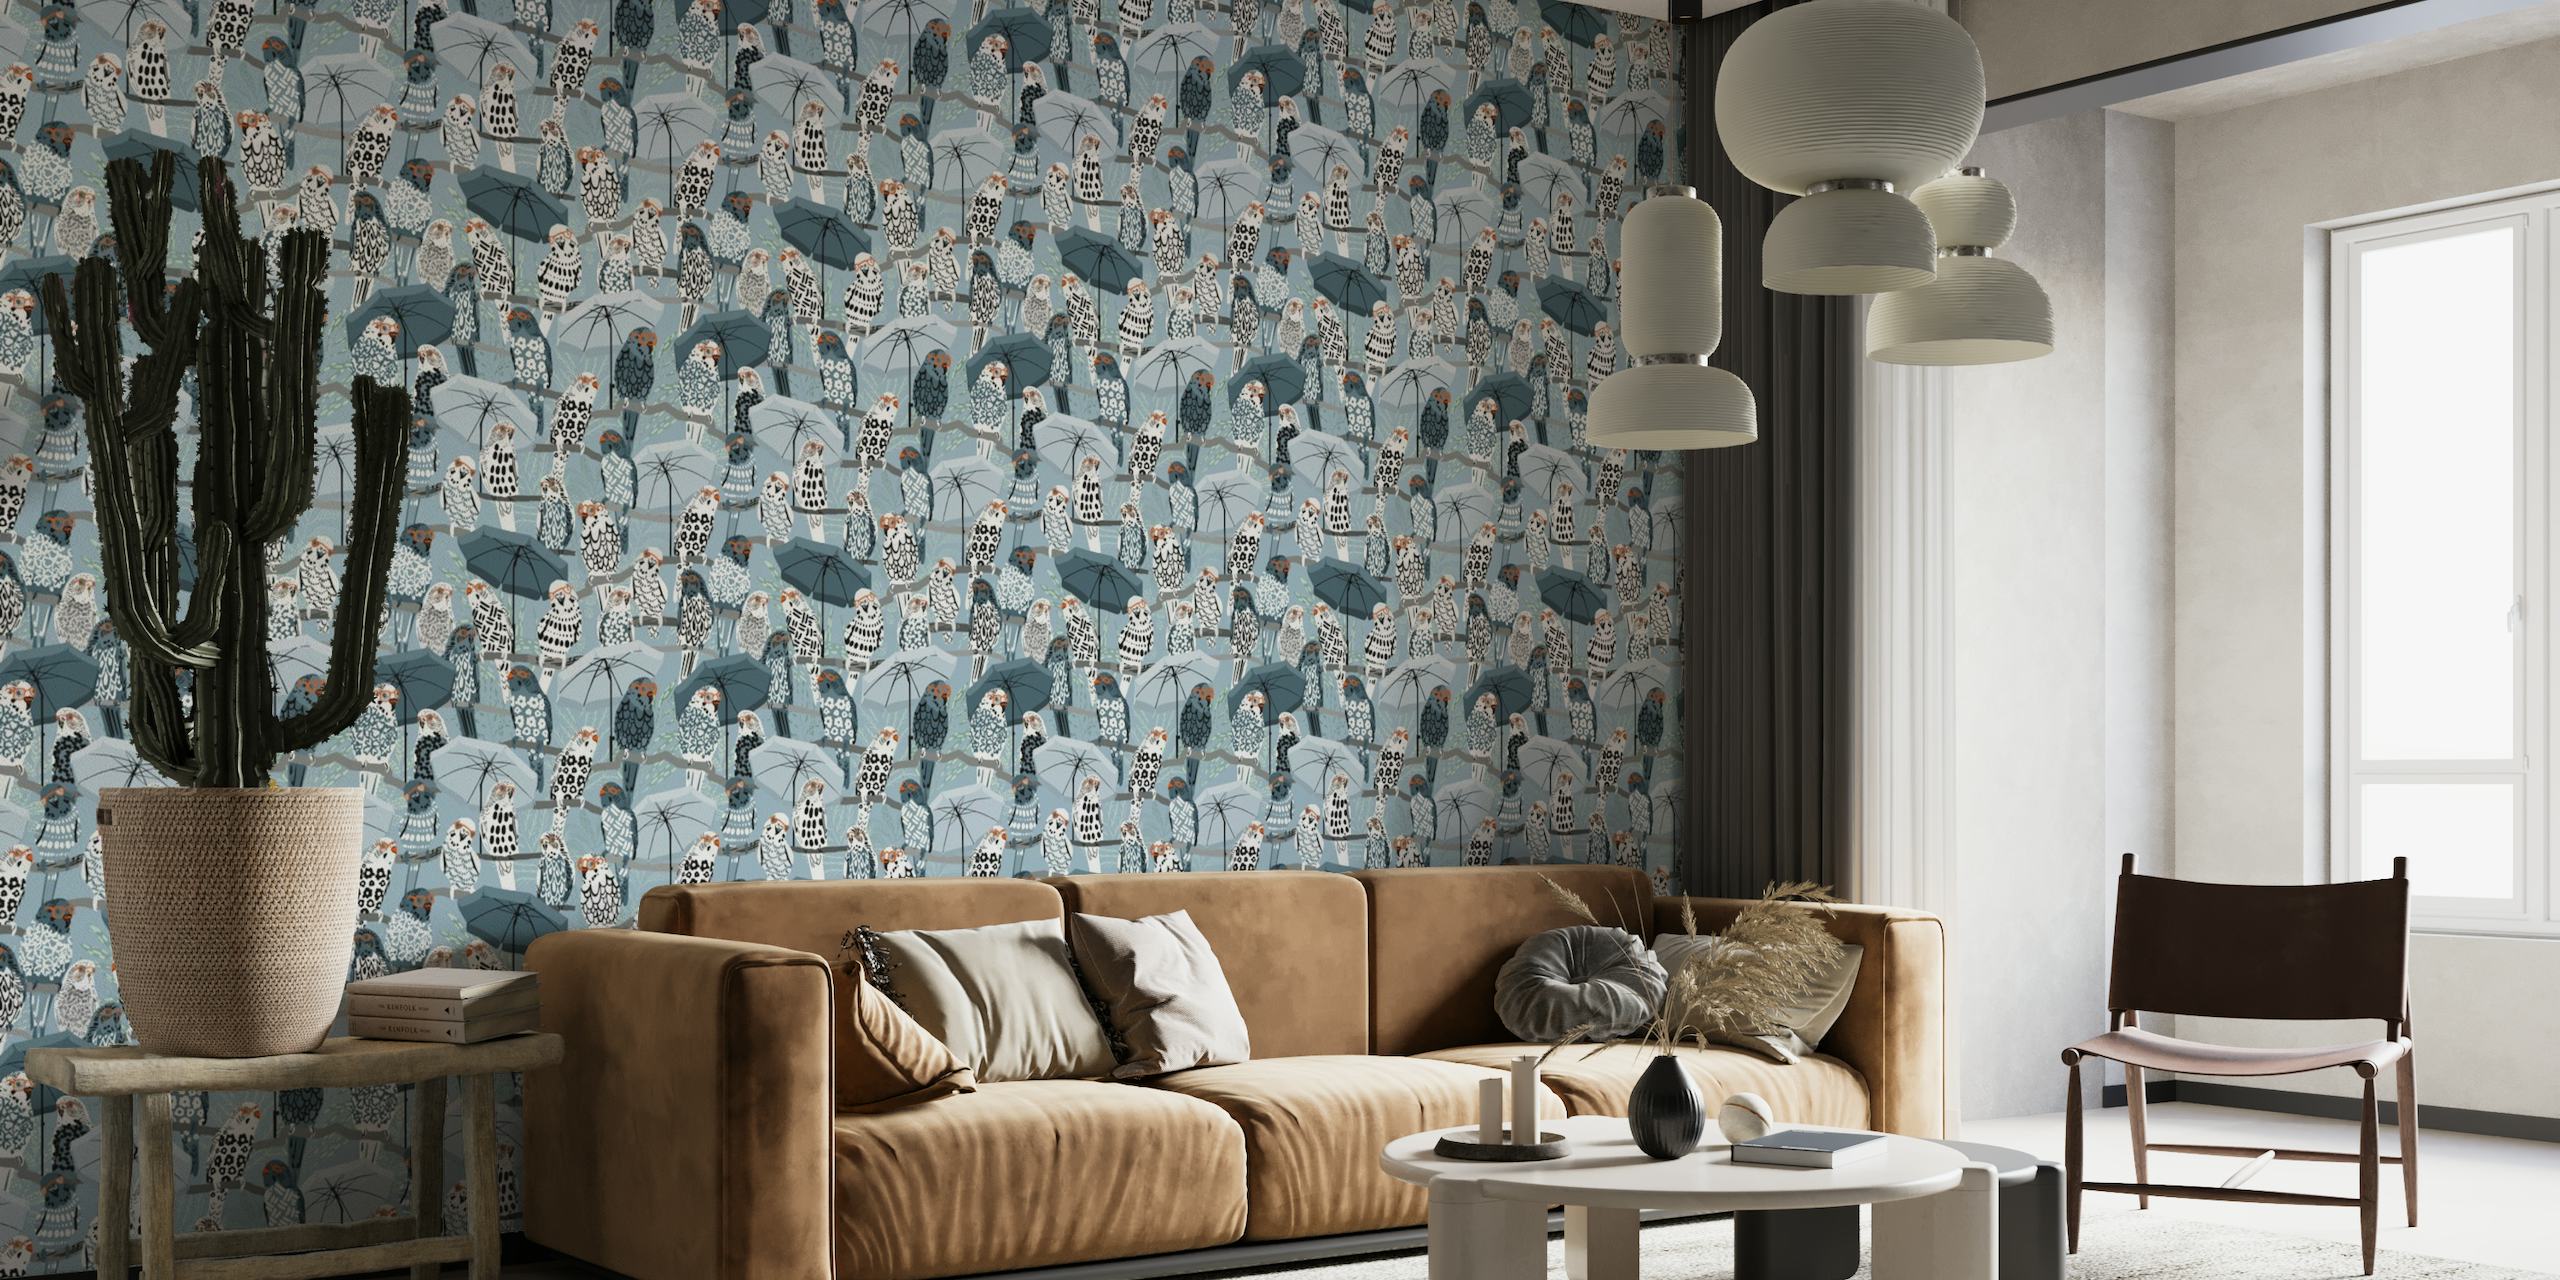 A wall mural of whimsical budgies in vacation attire with a blue background and tropical elements